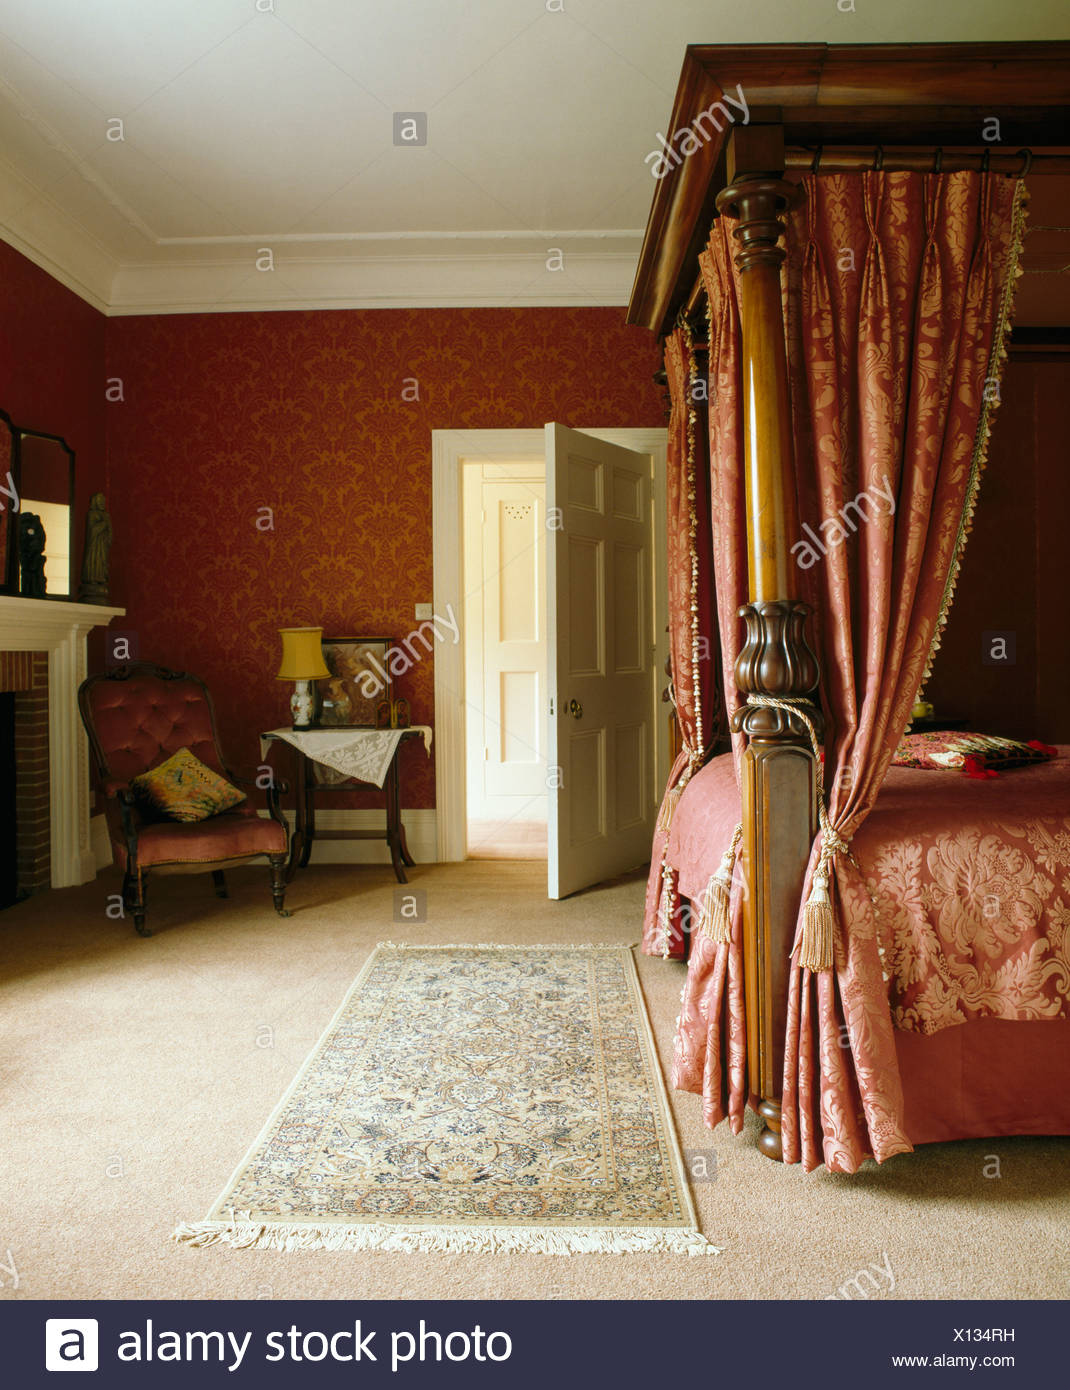 Red Damask Drapes On Antique Fourposter Bed In Red Bedroom